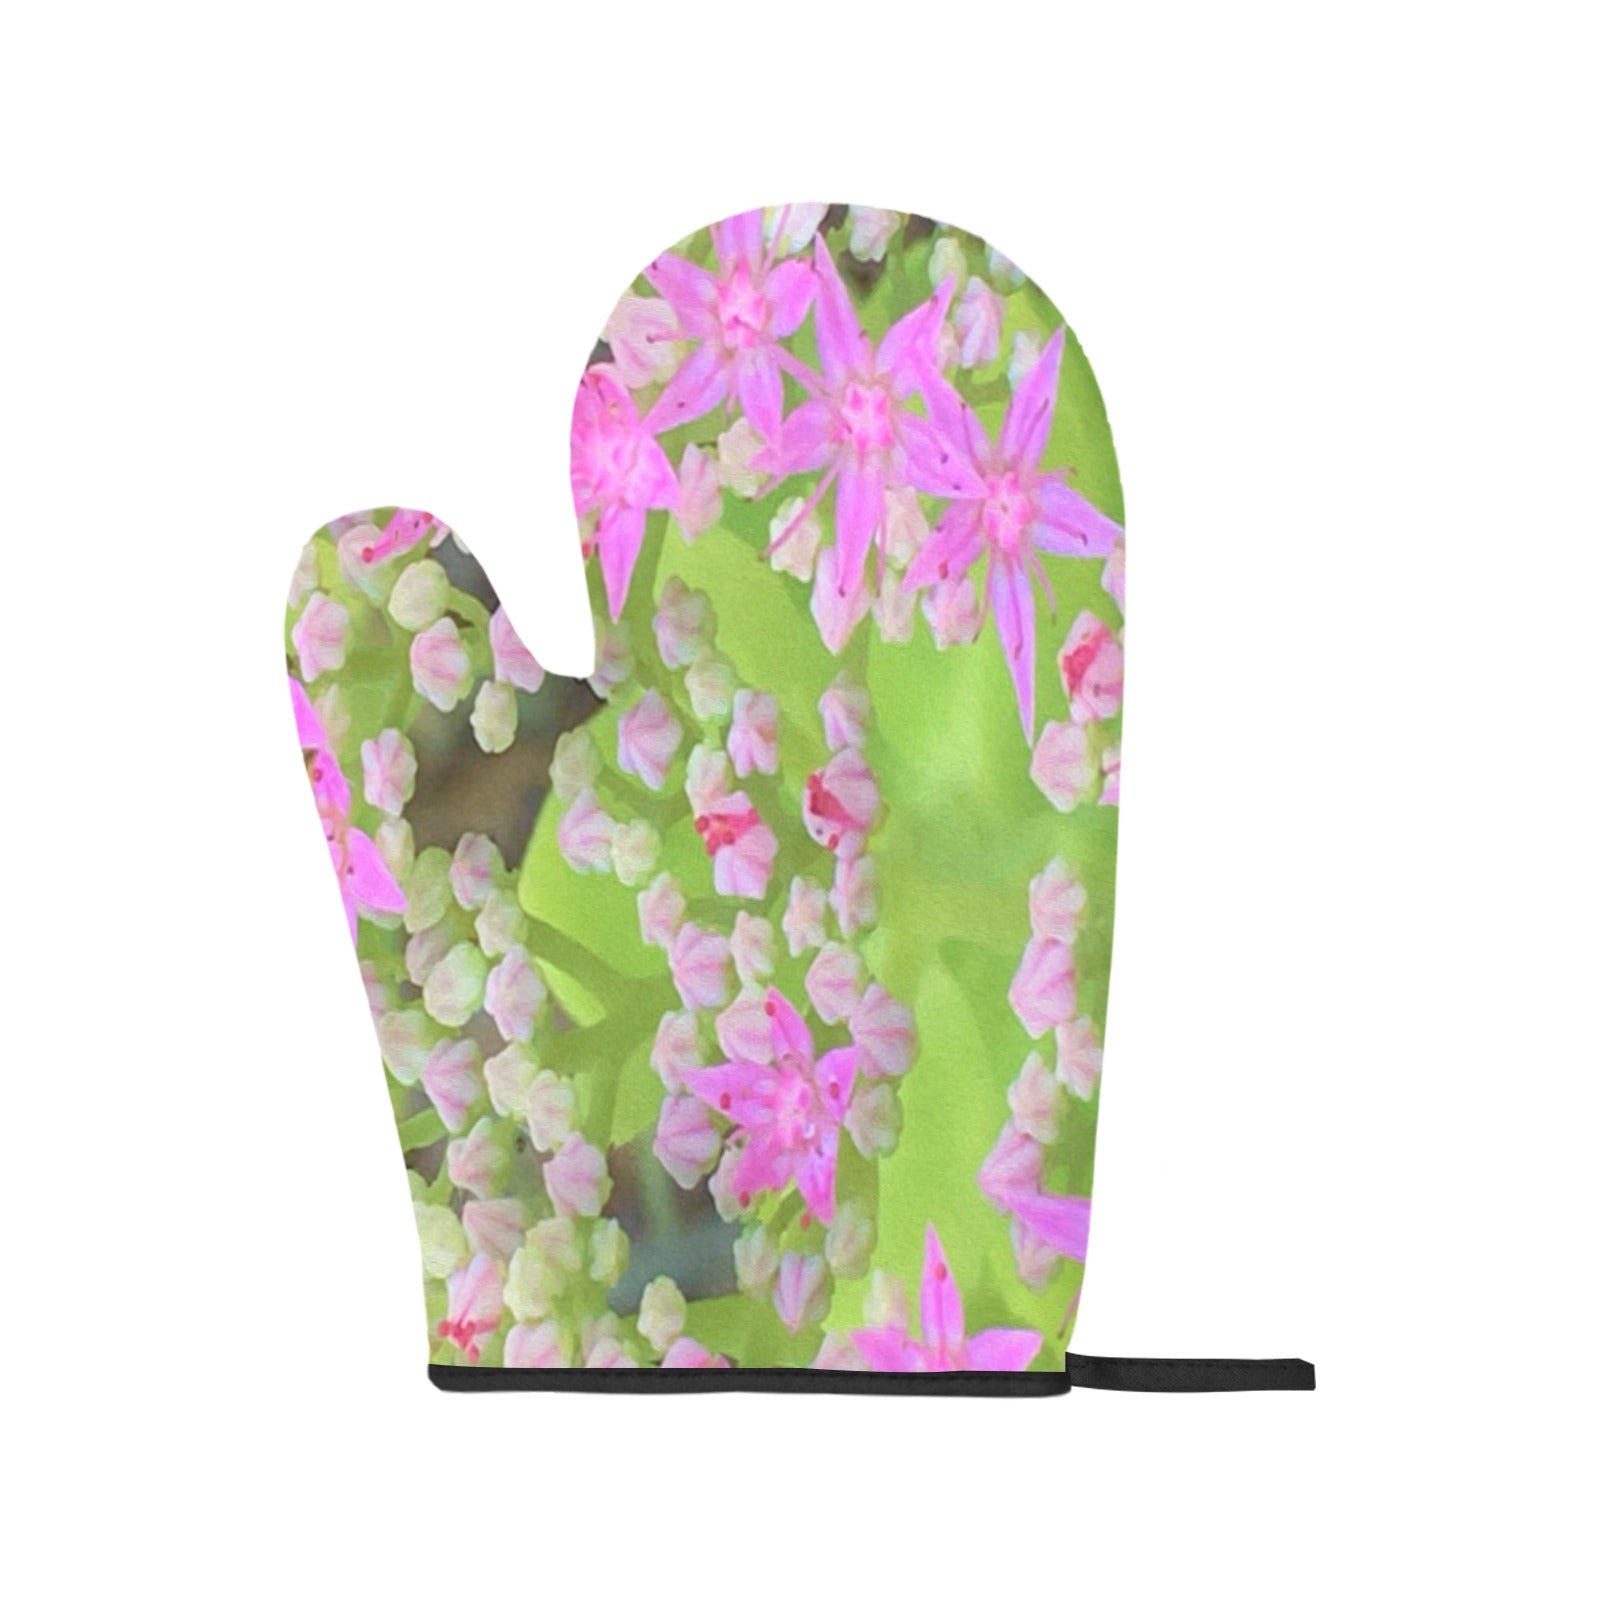 Oven Mitts and Pot Holders Set, Hot Pink Succulent Sedum with Fleshy Green Leaves